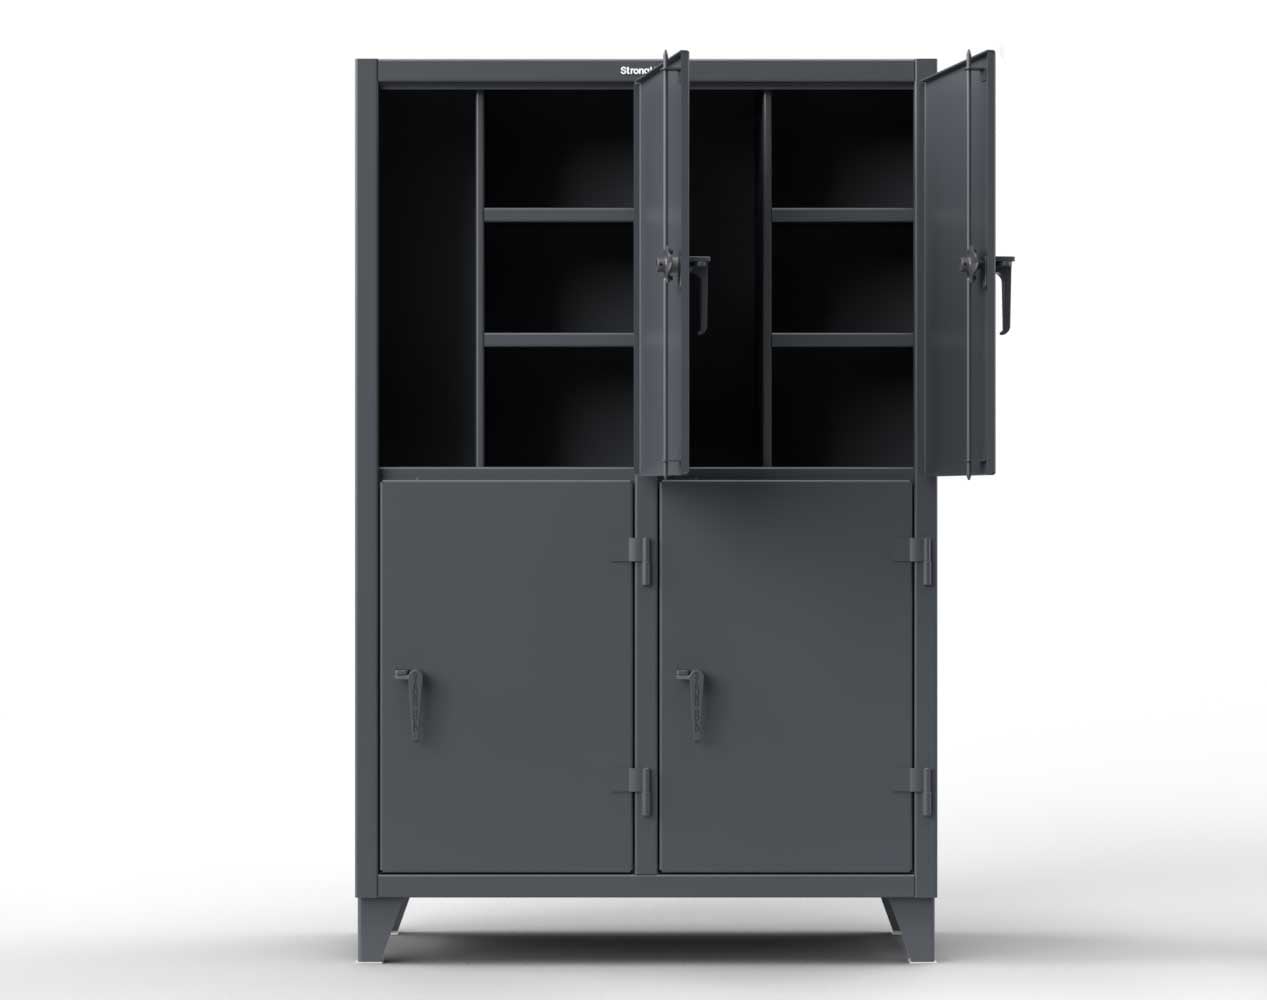 Extreme Duty 12 GA Double-Tier Locker with 6 Compartments, 12 Shelves, Coat Hooks - 74 in. W x 24in. D x 78 in. H